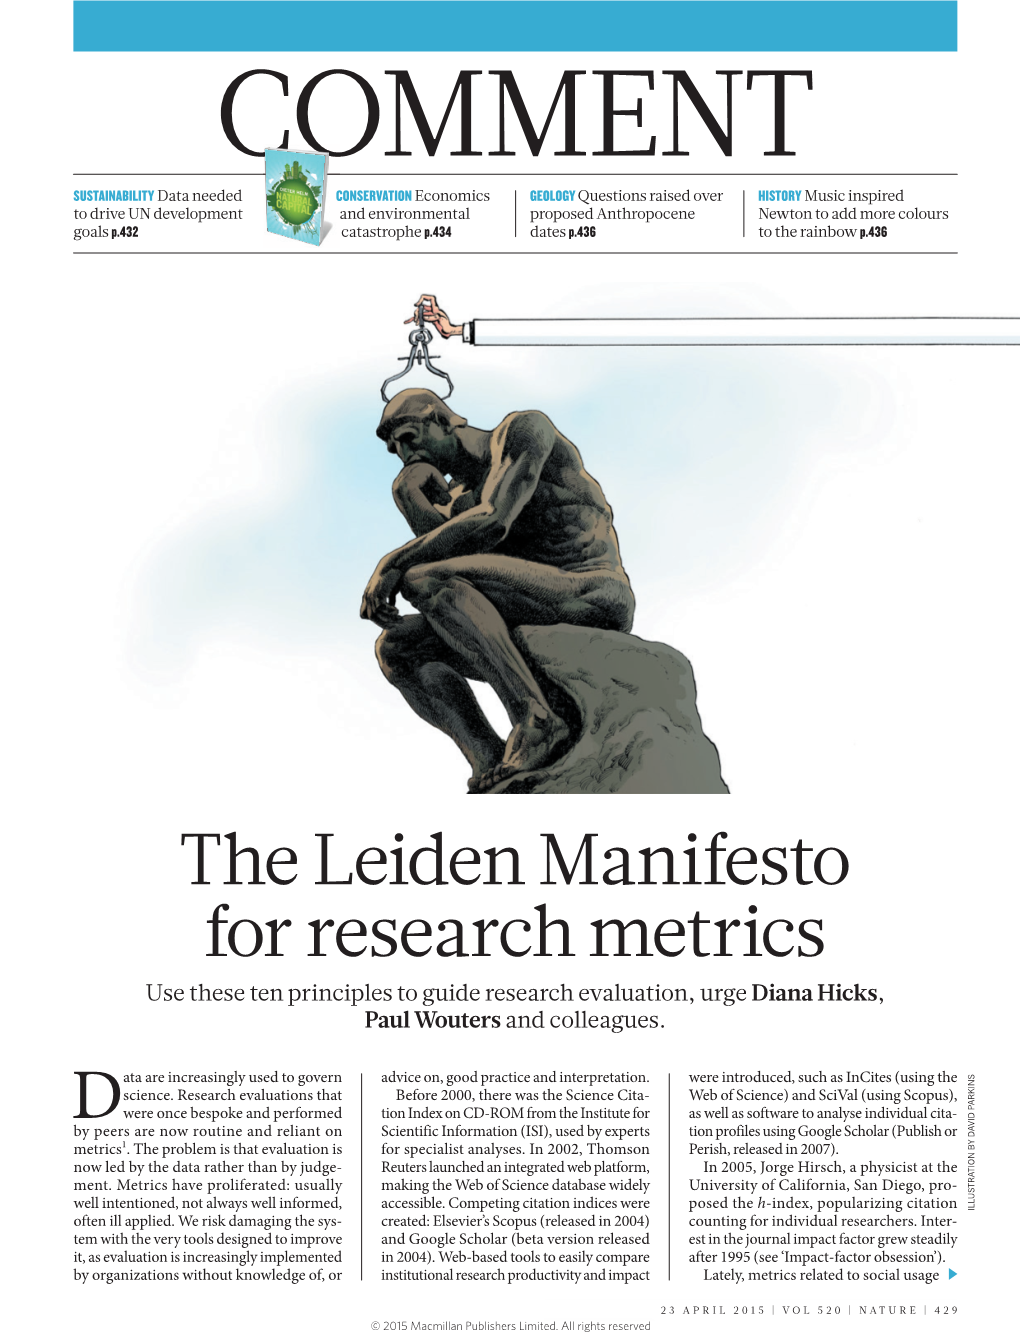 The Leiden Manifesto for Research Metrics Use These Ten Principles to Guide Research Evaluation, Urge Diana Hicks, Paul Wouters and Colleagues